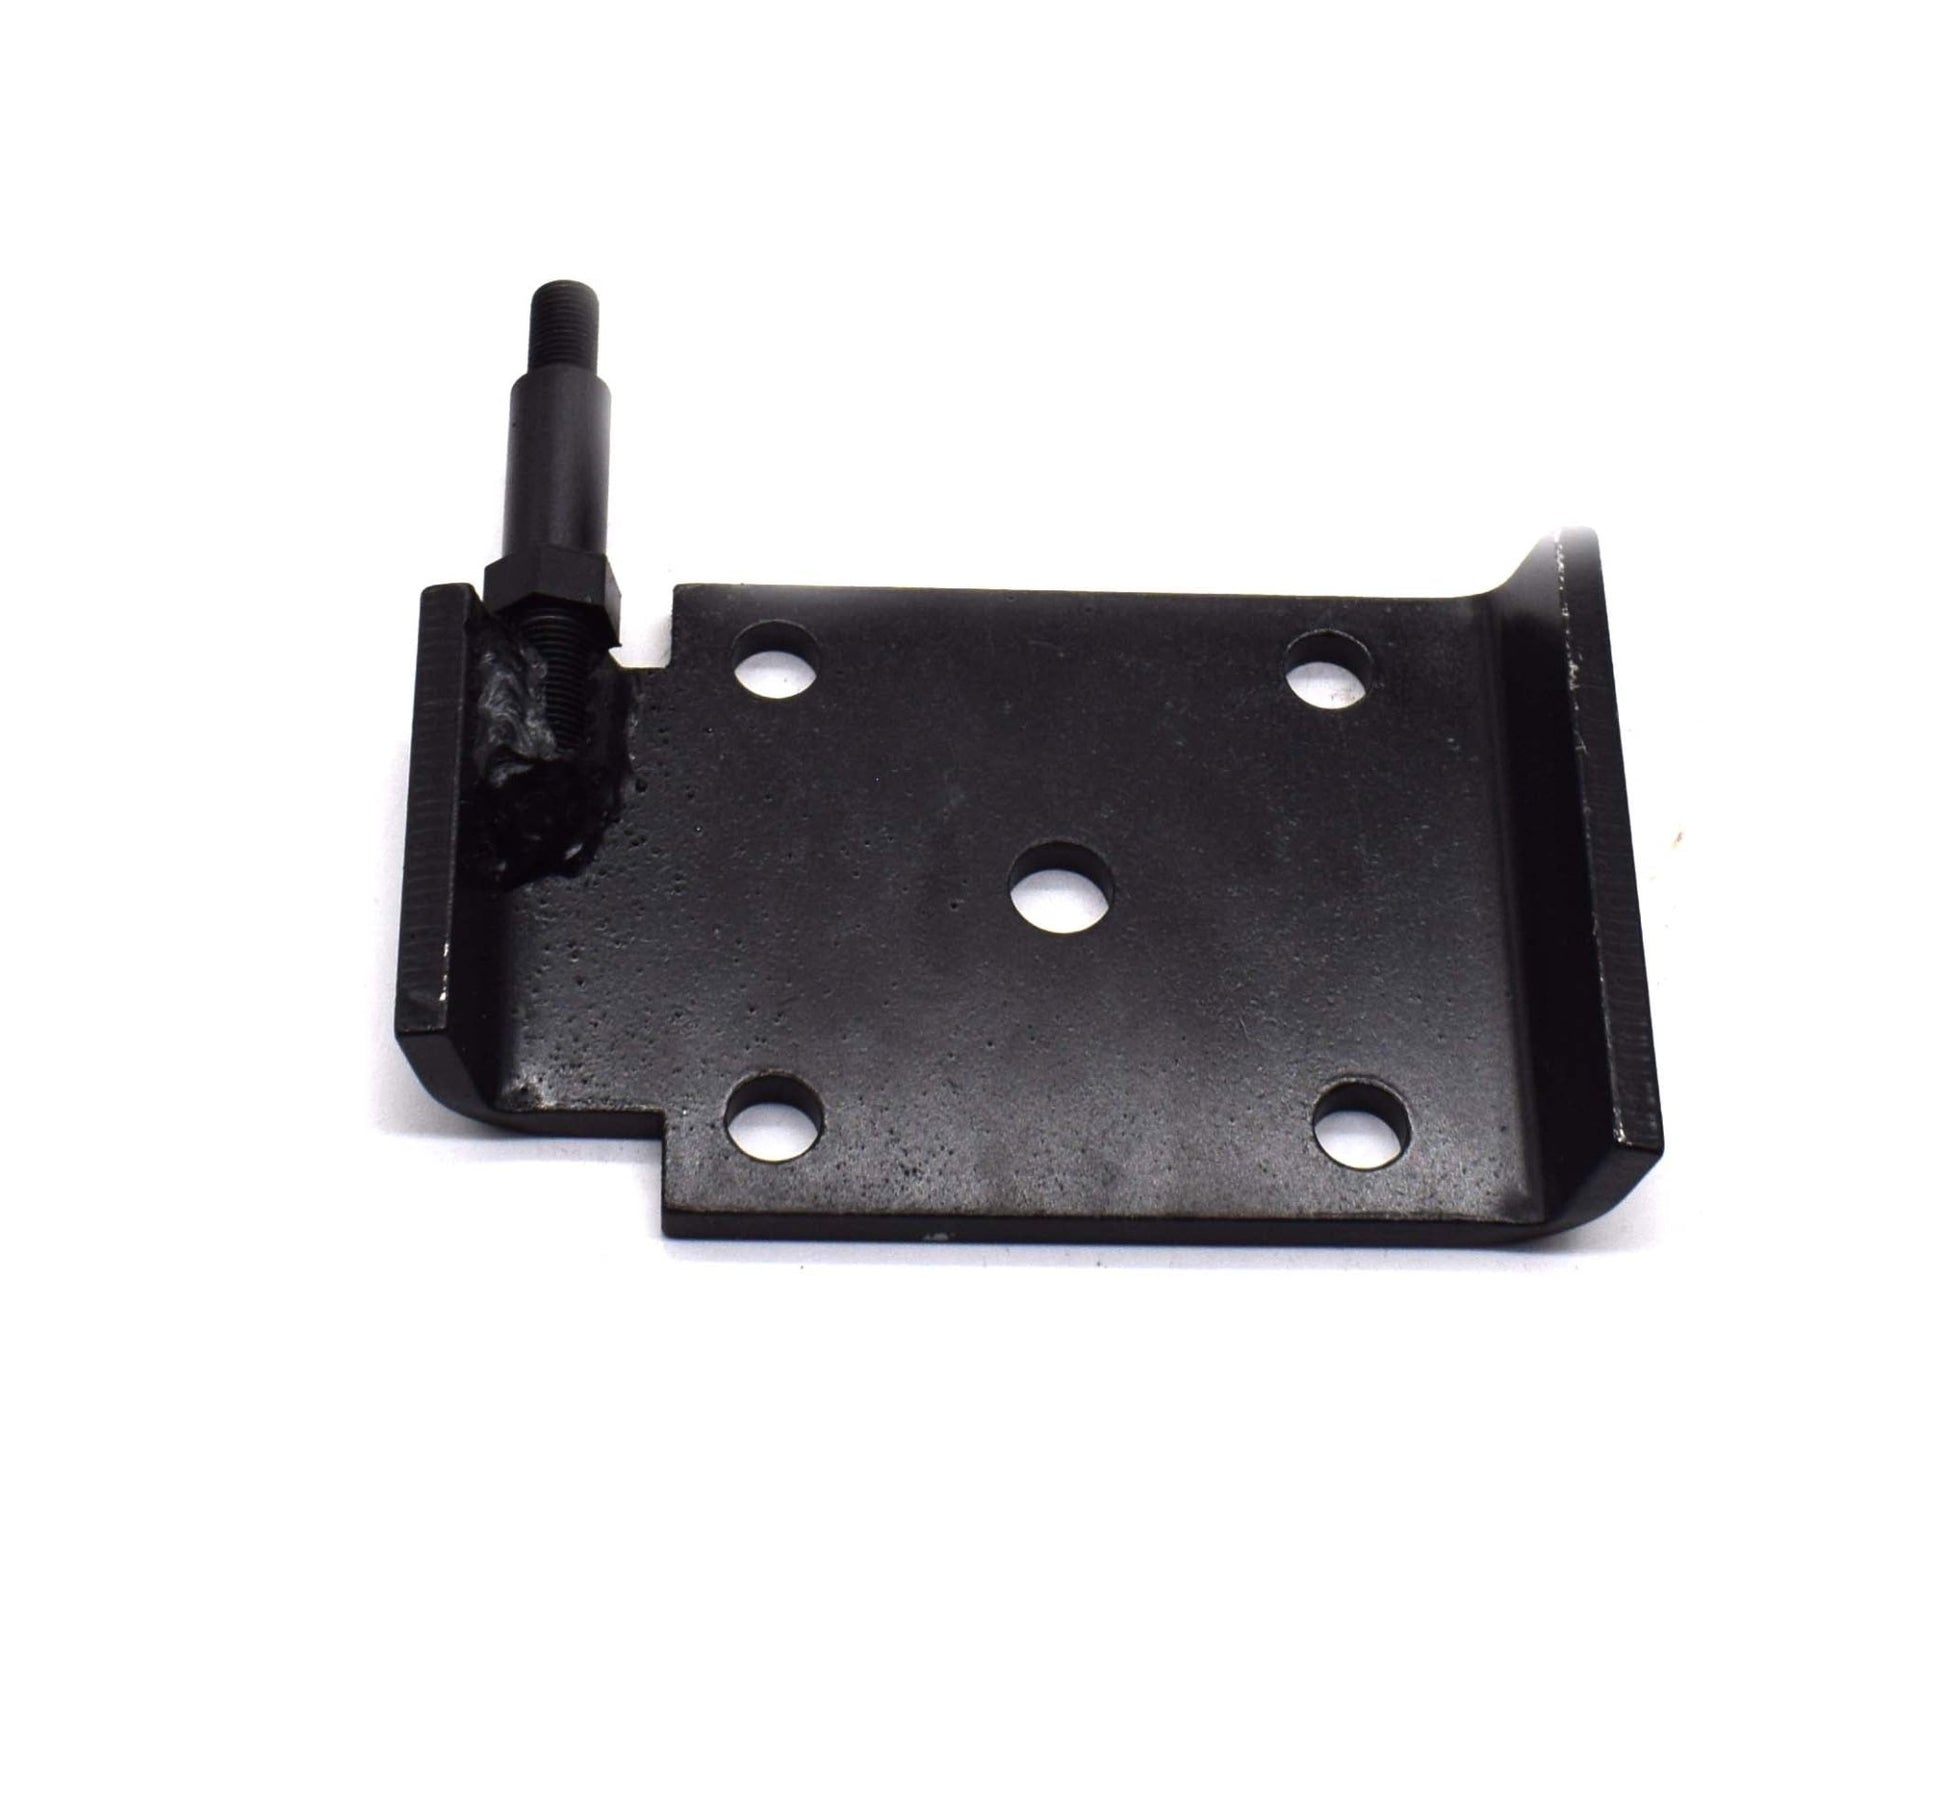 Leaf Spring Shock Mount Plate, Rear Driver Side, 1967-1973 Jeepster Commando and Jeep Commando - The JeepsterMan